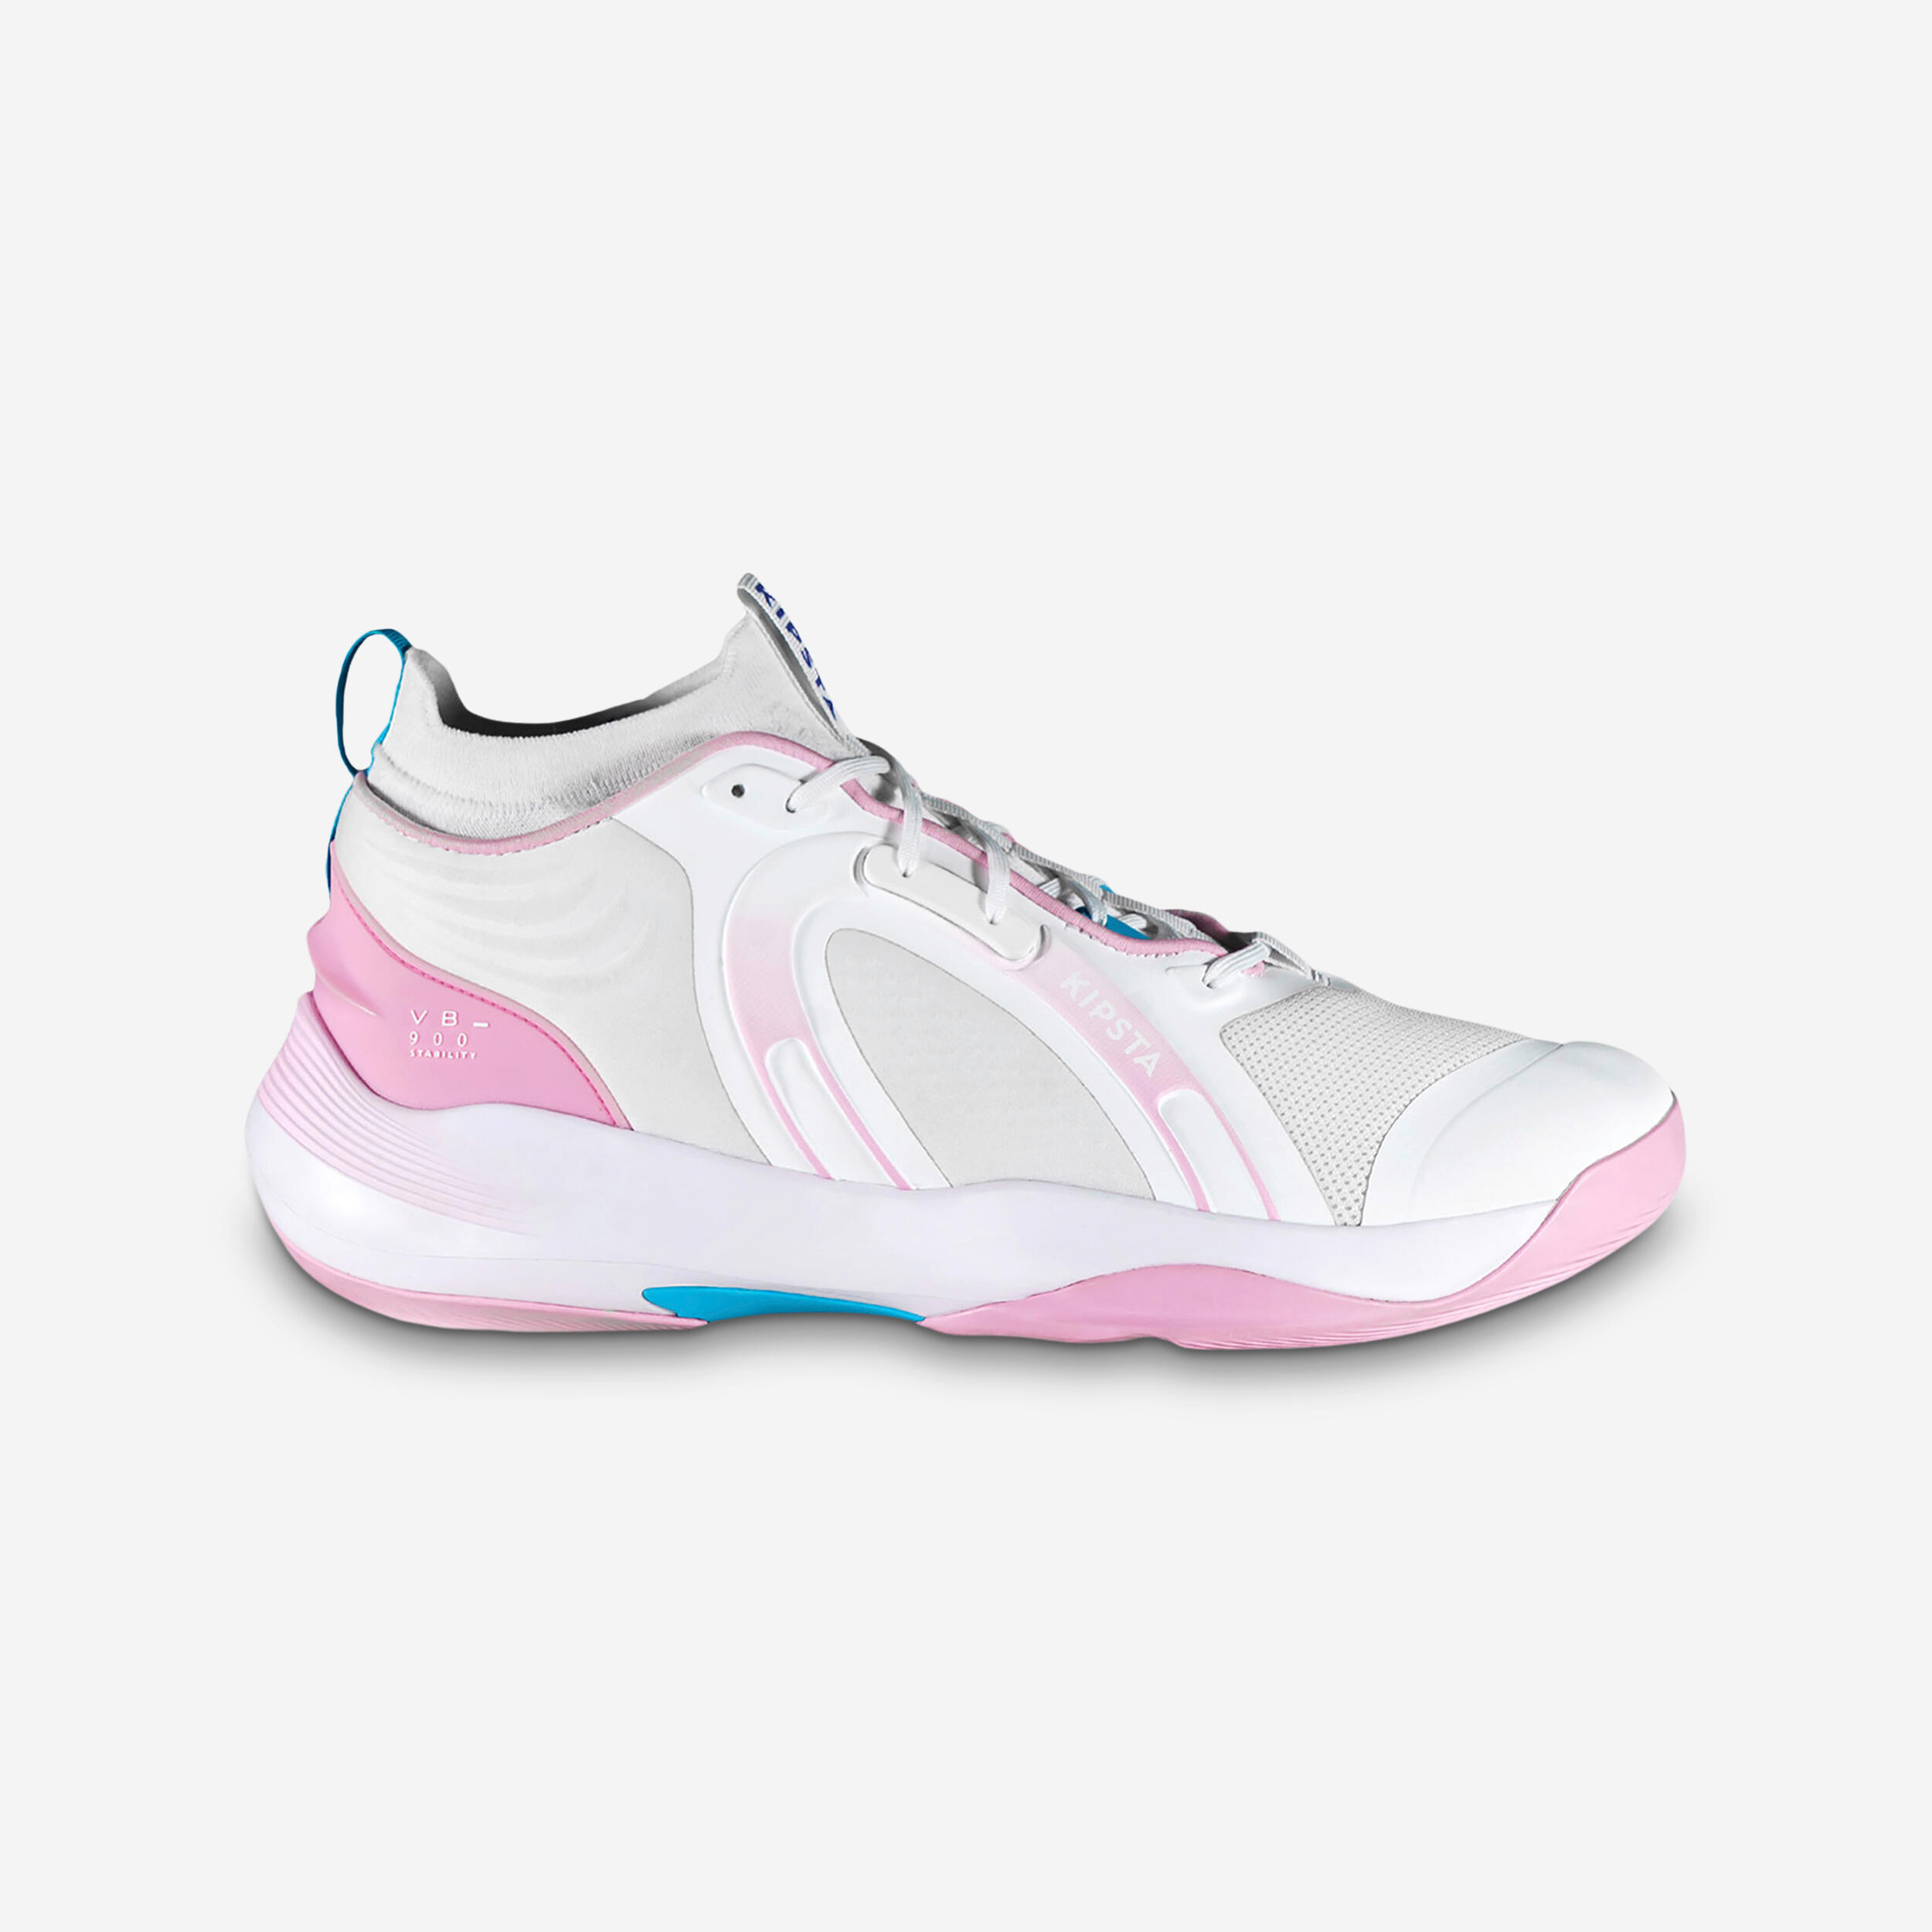 chaussures de volley-ball femme - vb900 stability rose - alessia orro - kipsta